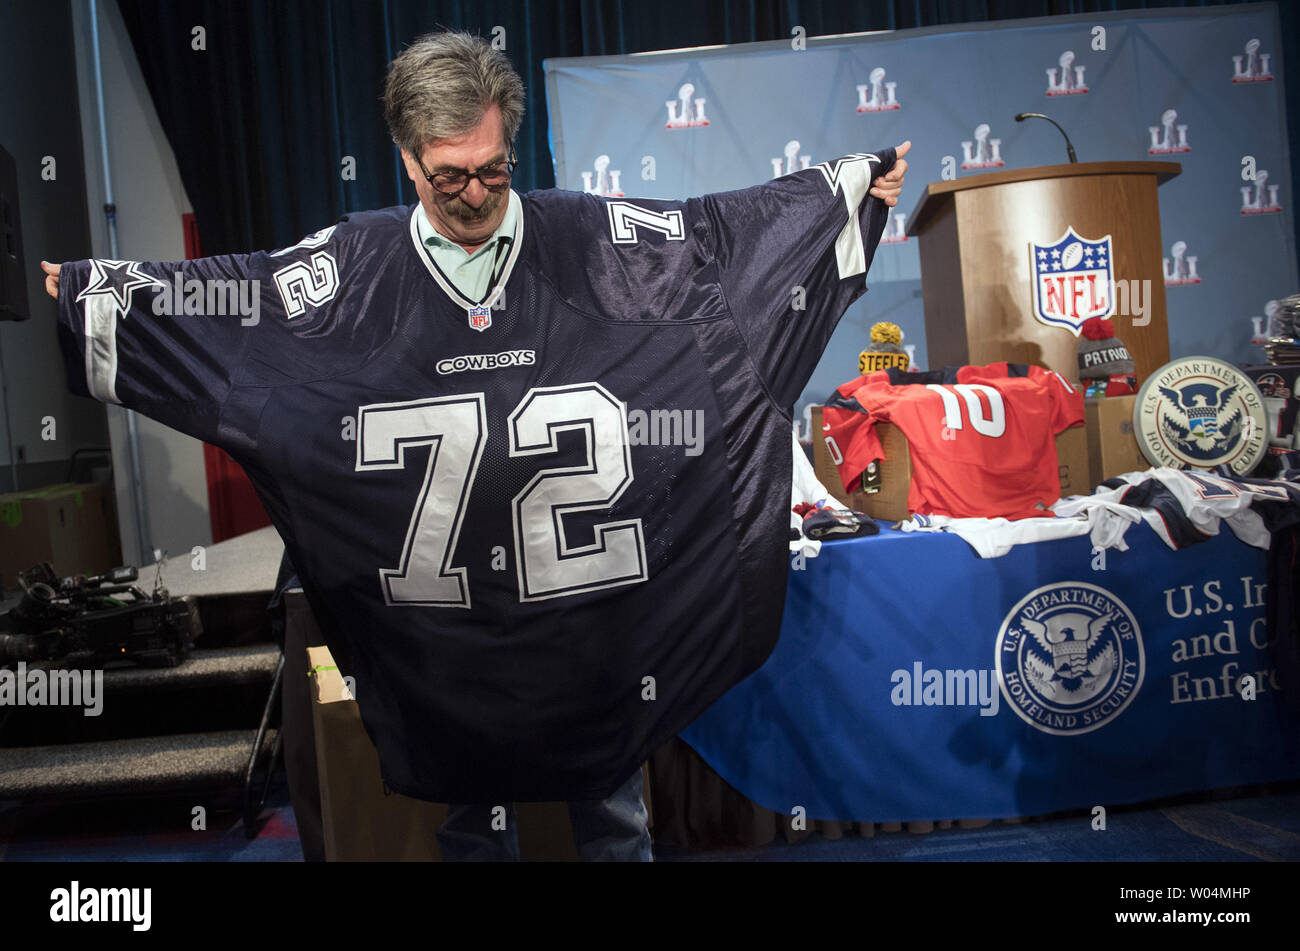 A man wears a counterfeit 10XL Cowboys jersey at a press conference on NFL  counterfeit merchandise and tickets, in Houston, Texas on February 2, 2017.  Officials with the NFL, Department of Homeland